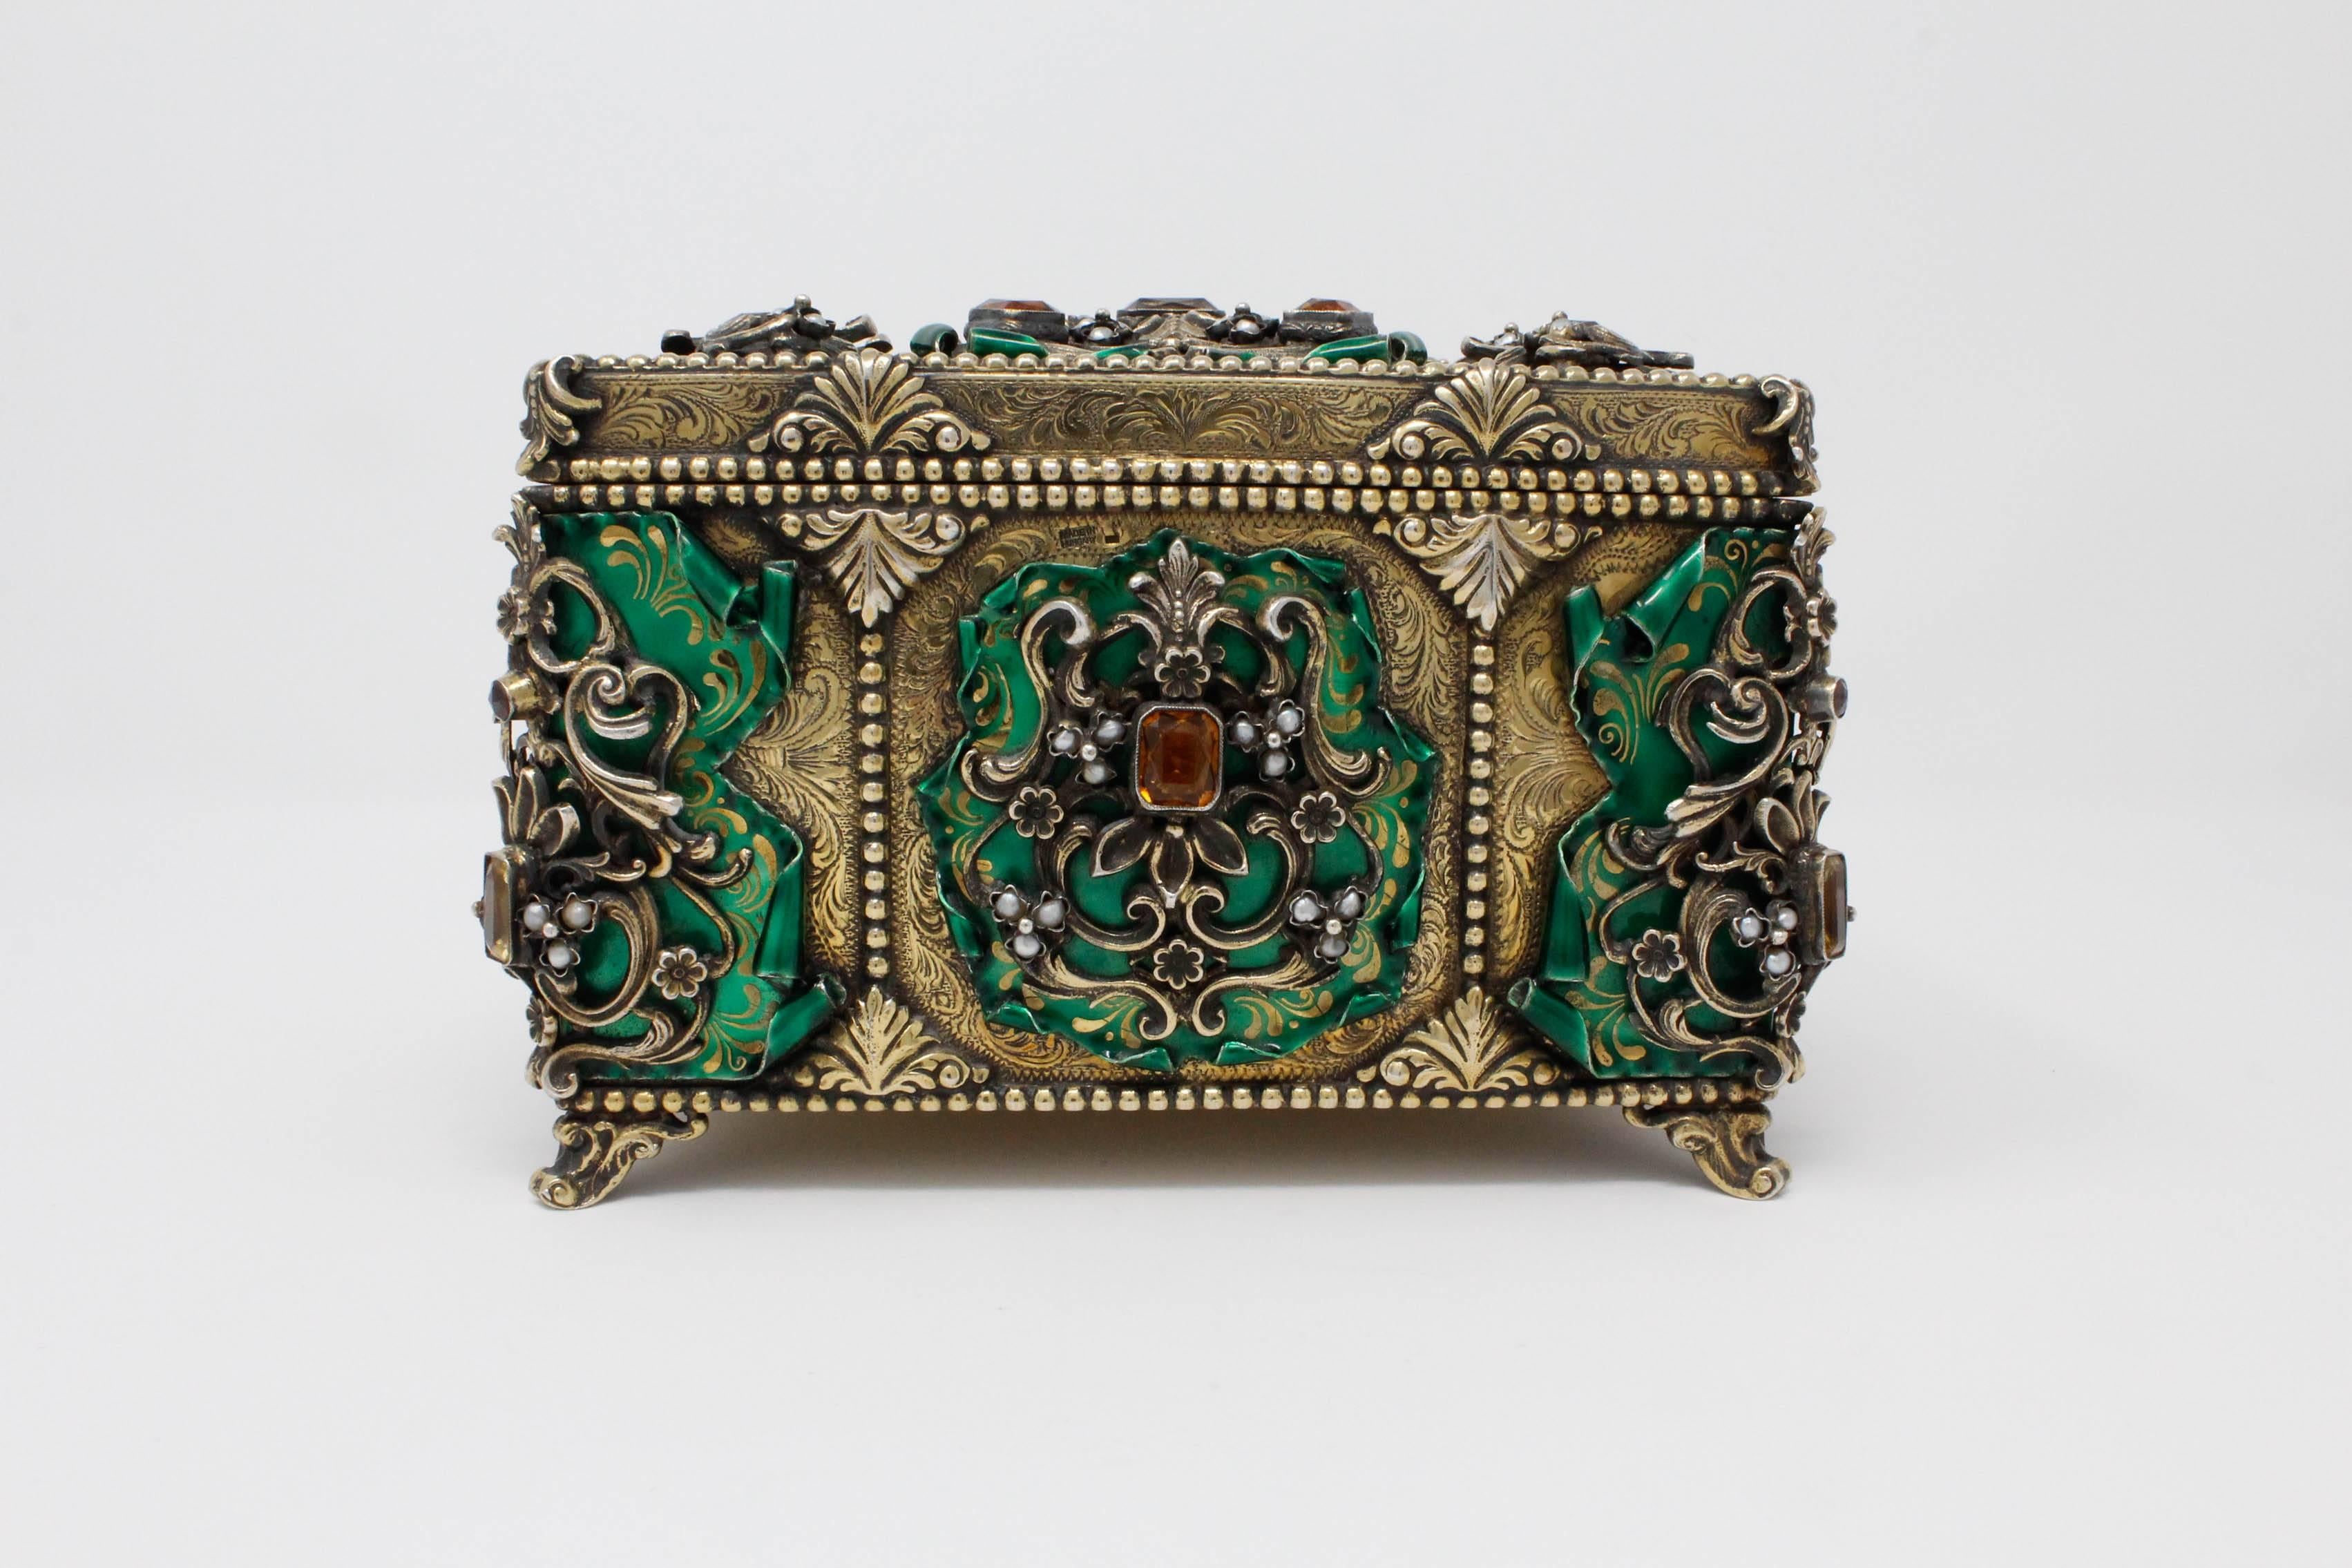 Austro-Hungarian Jewelled Casket. C. 1900, made in Hungary. Hand engraved 925 Silver Gilt and Enamel. Set with Citrines, Pearls, and Garnets. Shown unpolished with natural patina. One citrine replaced with synthetic sapphire. 7 inches wide, 4.5